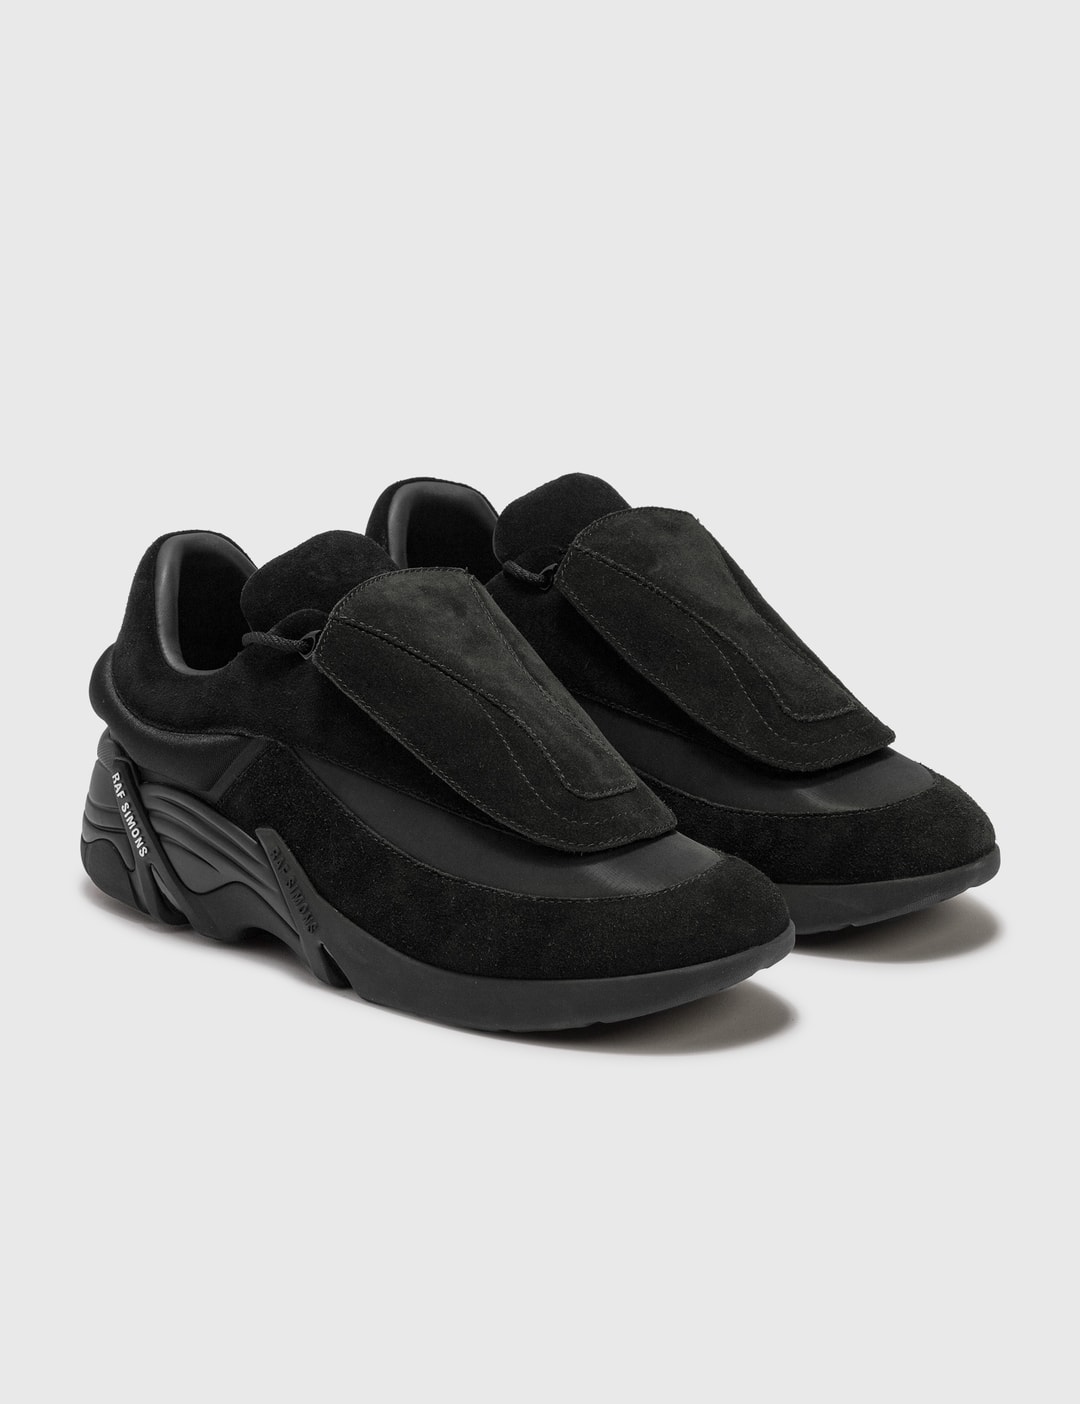 Raf Simons - Antei Runner | HBX - Globally Curated Fashion and ...